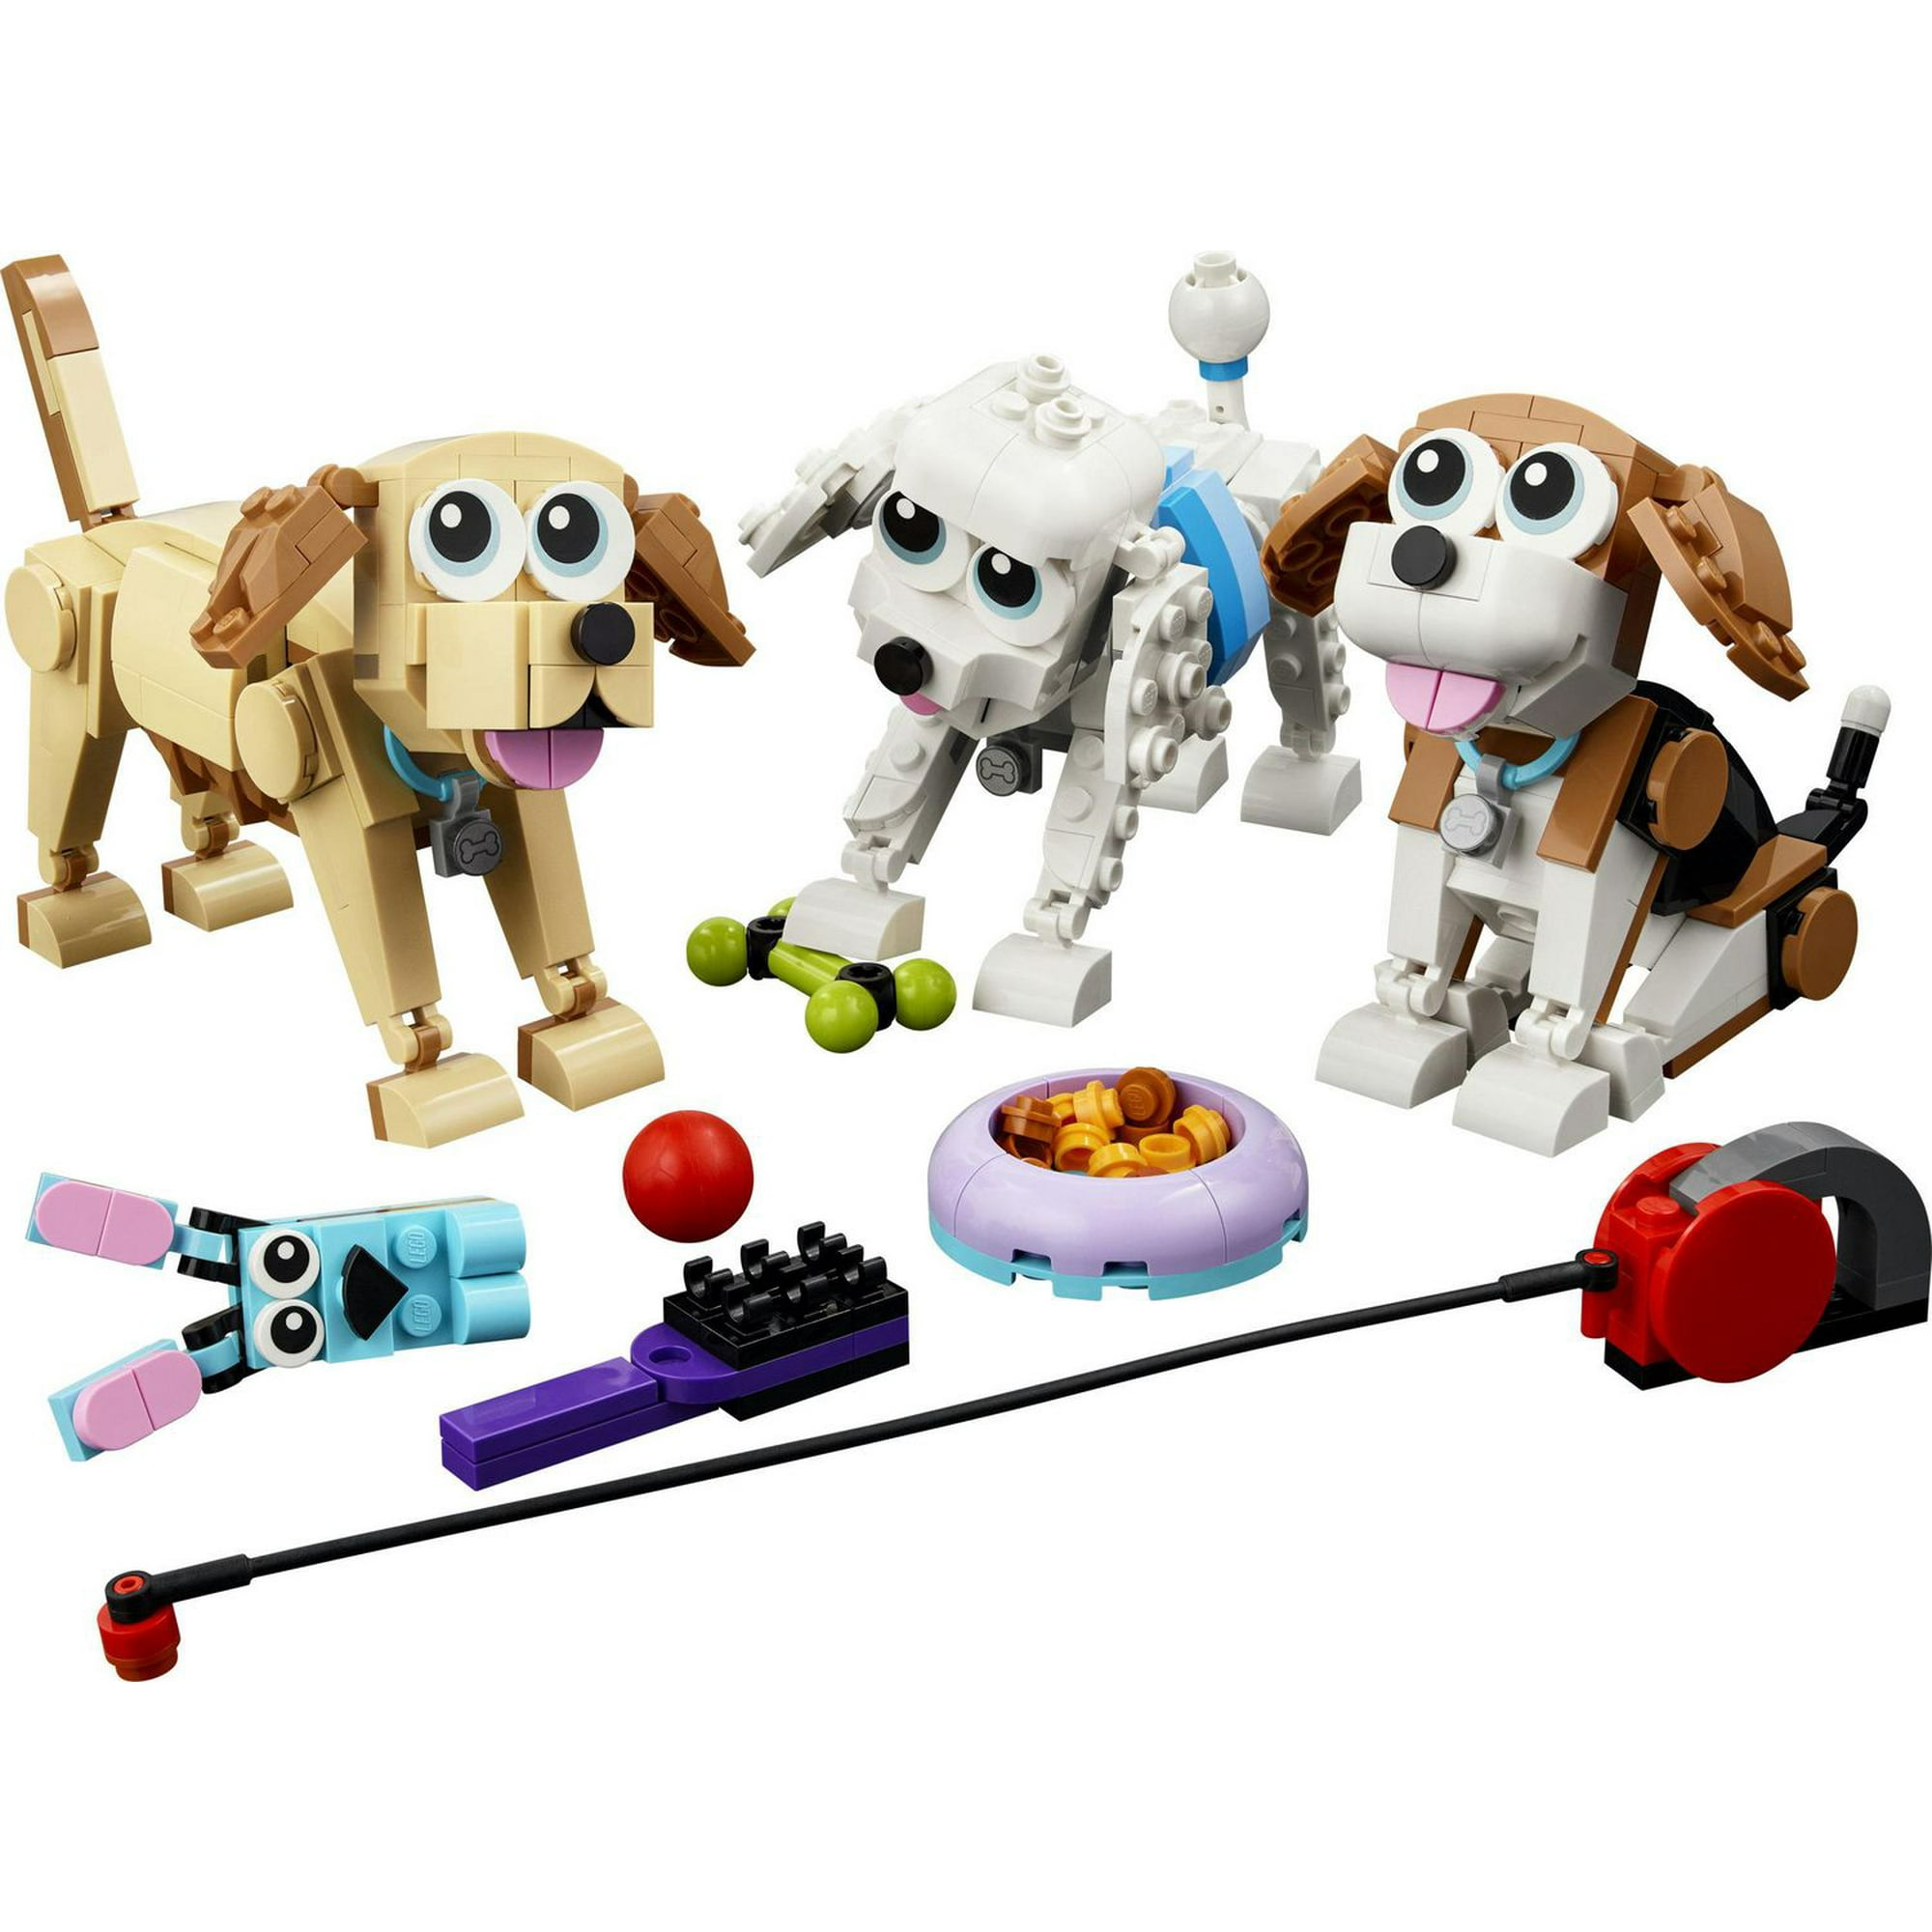 LEGO Creator 3-in-1 Adorable Dogs Building Toy Set 31137, Great